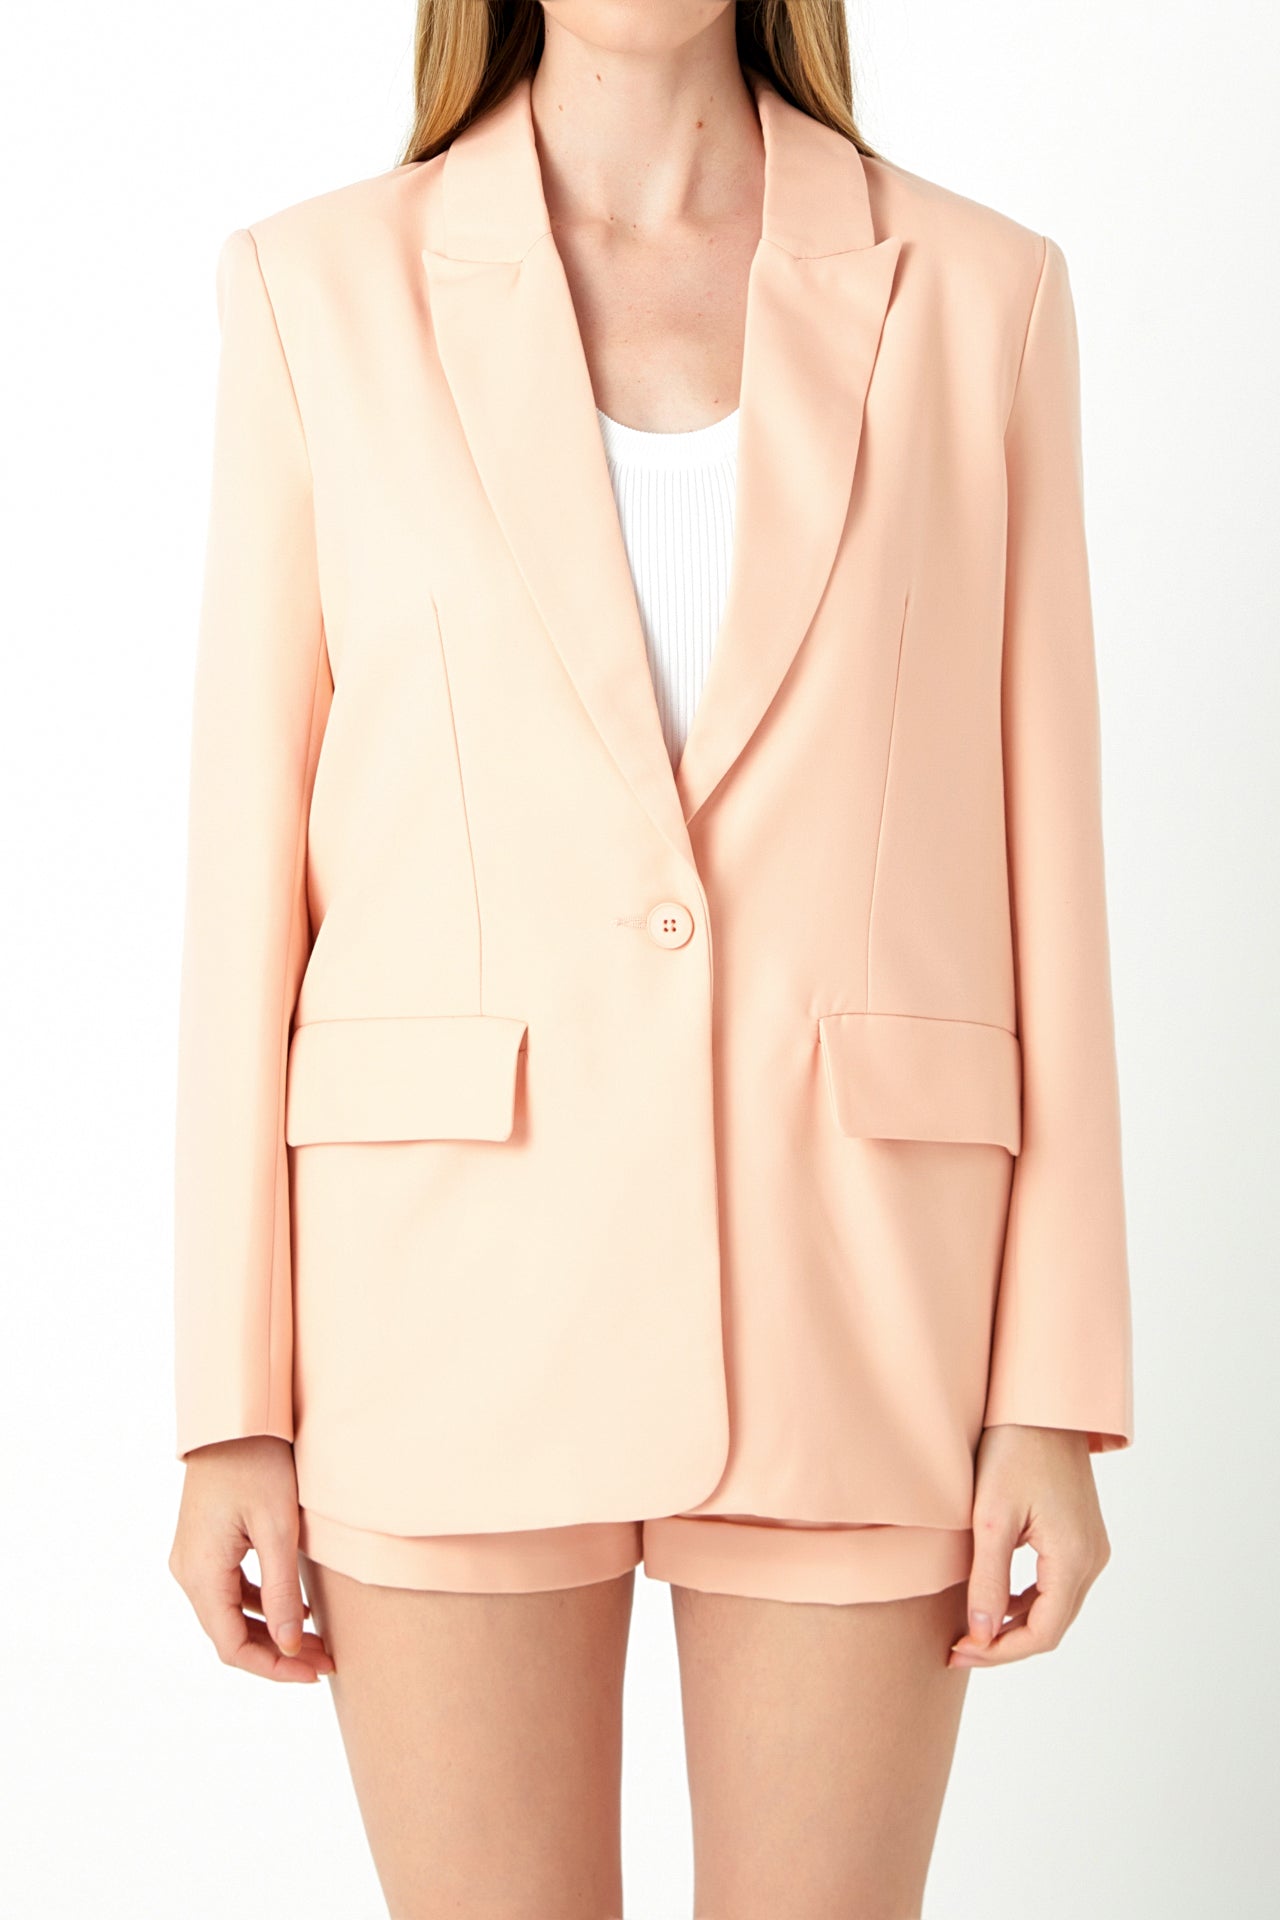 ENDLESS ROSE - Single Breasted Blazer - BLAZERS available at Objectrare